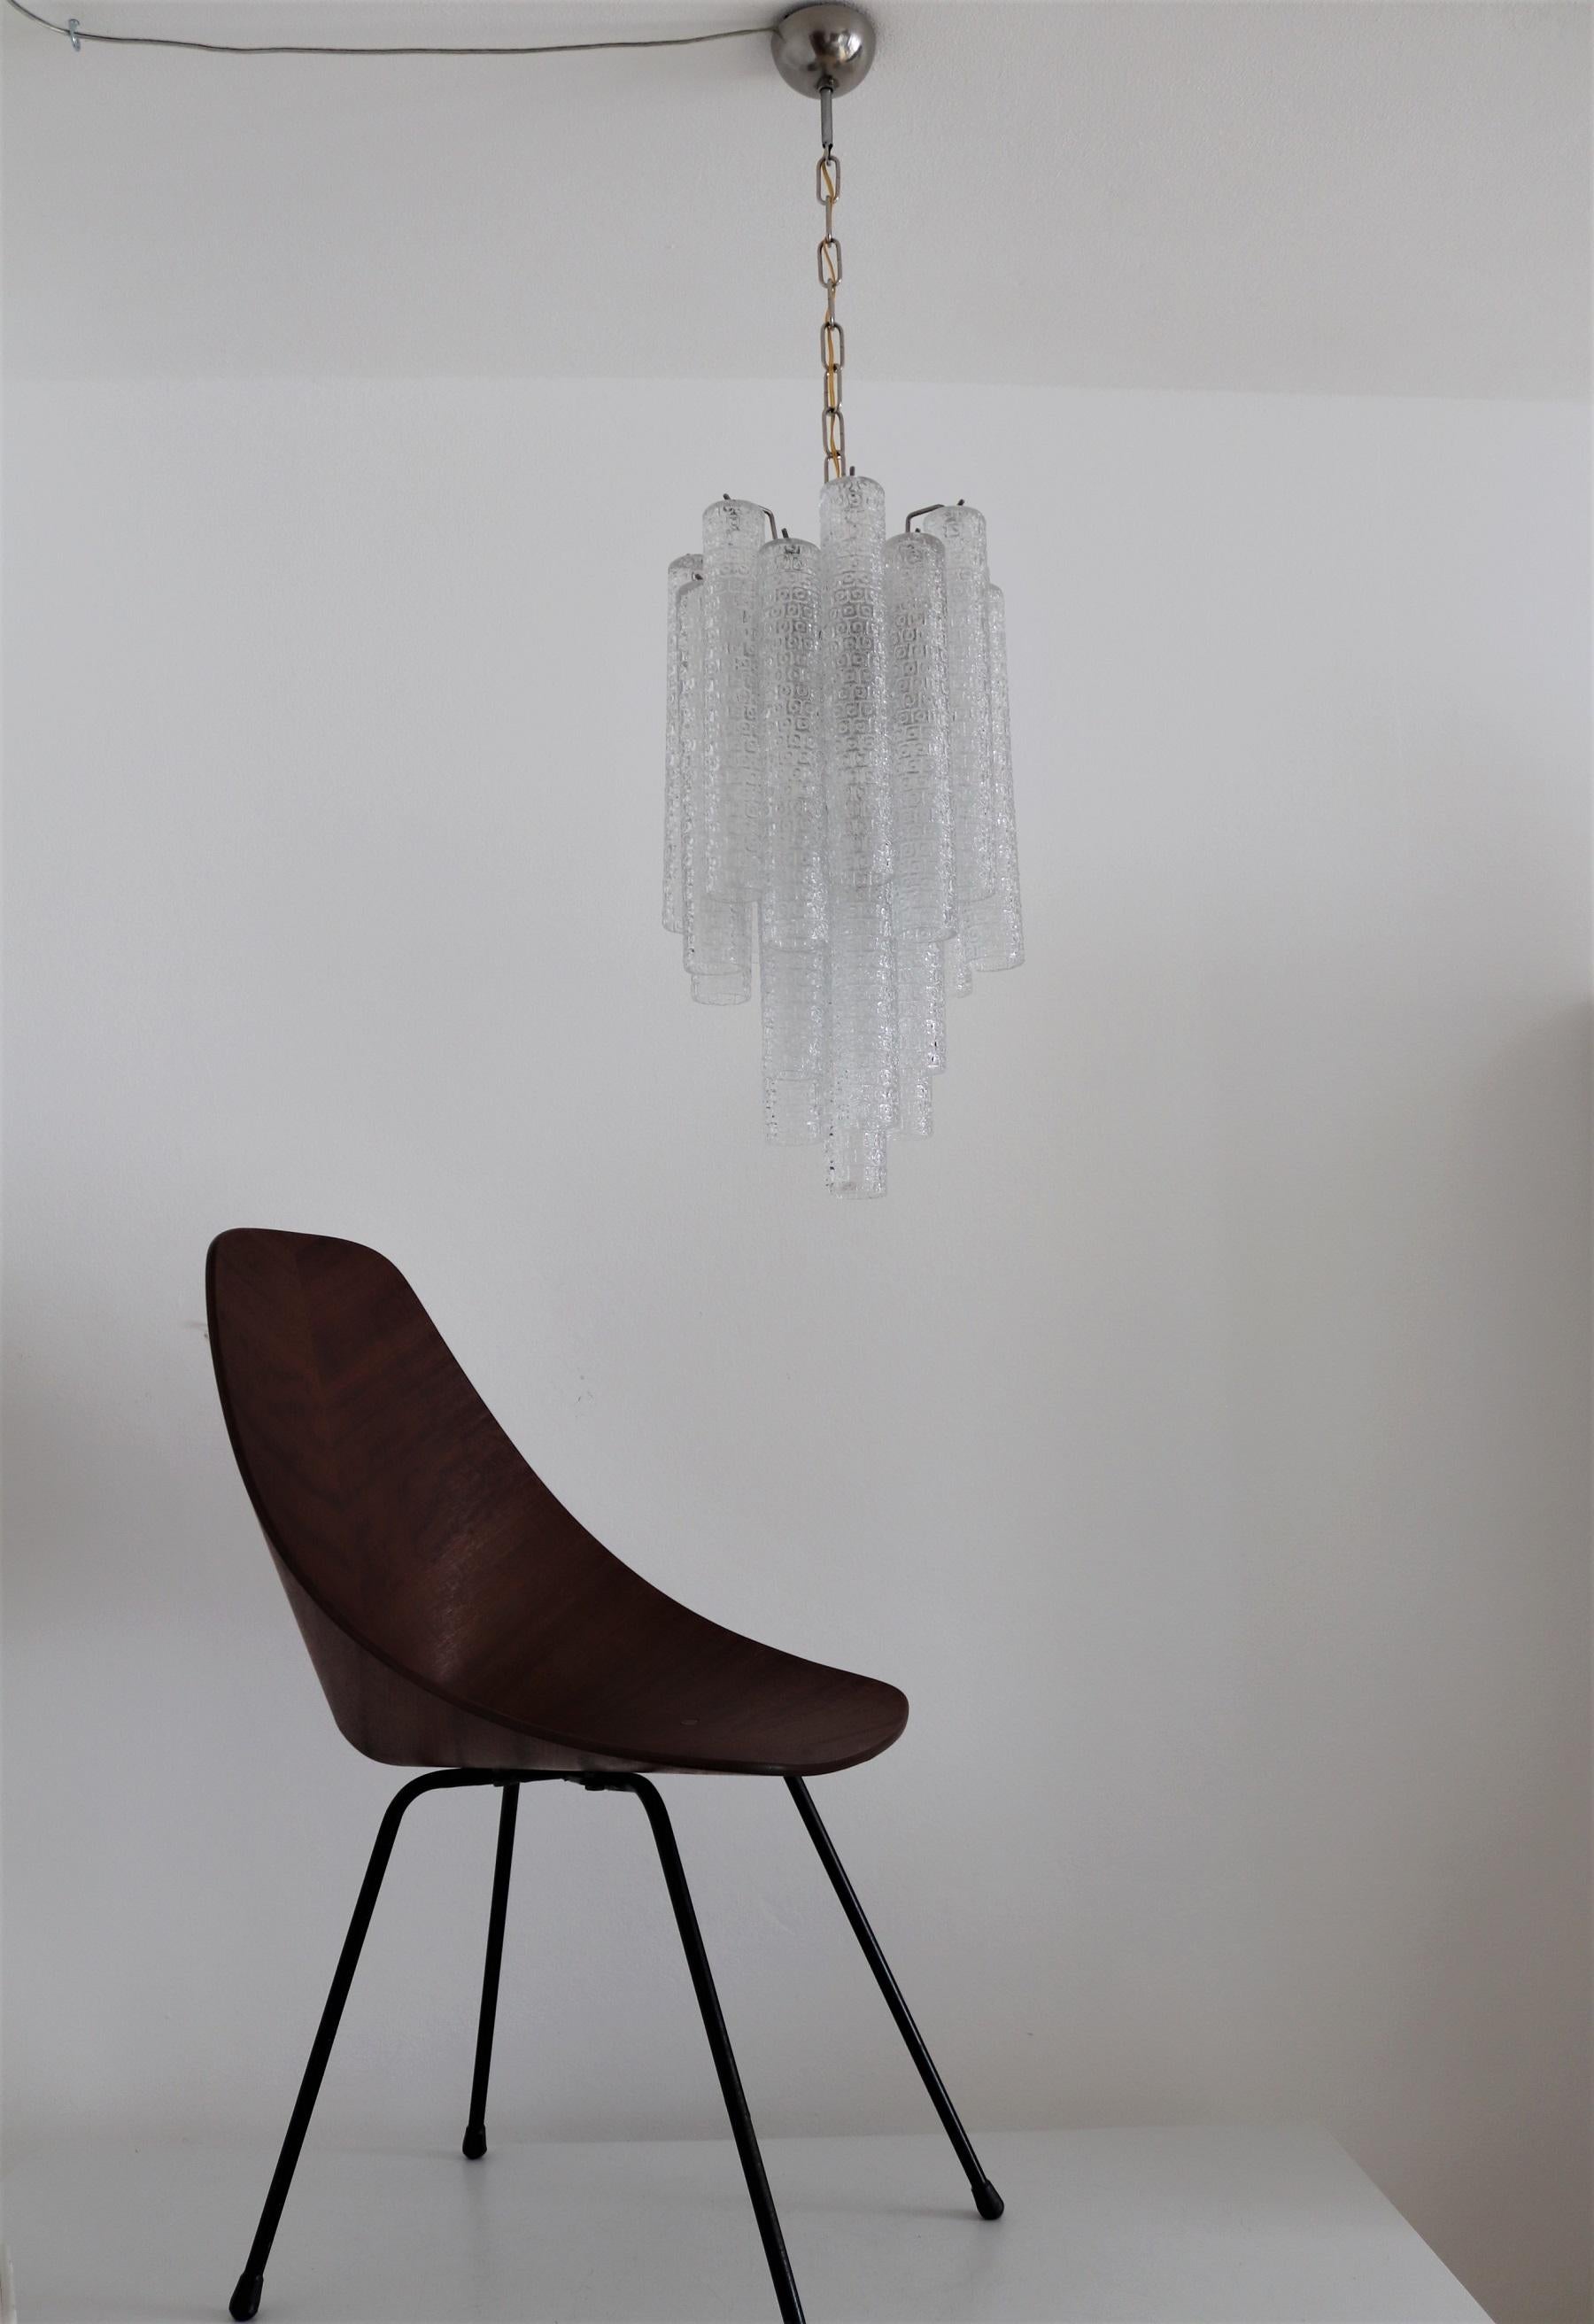 Italian Midcentury Murano Glass Crystal Tube Chandelier by Venini, 1950s For Sale 4